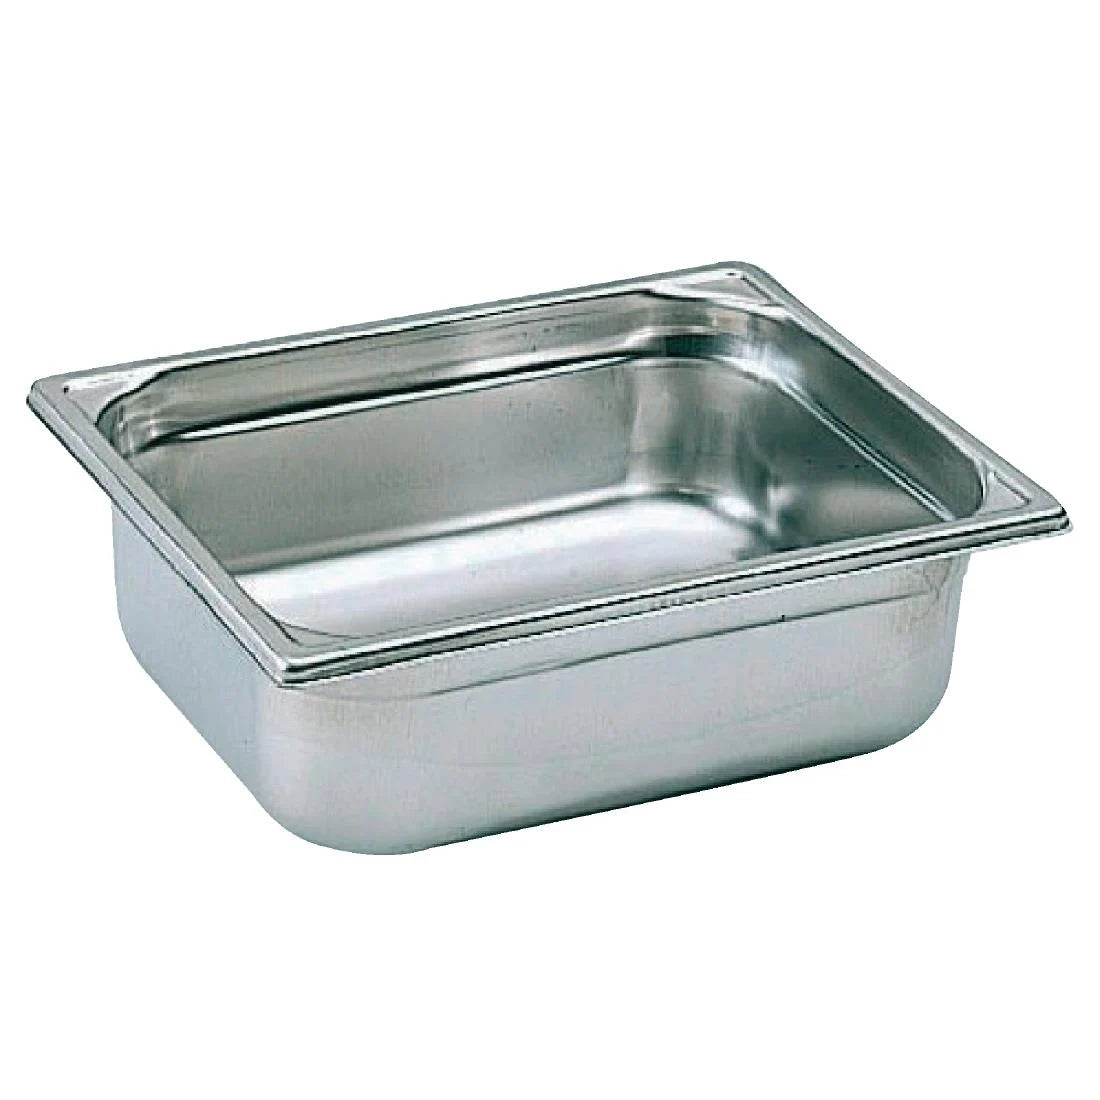 Bourgeat Stainless Steel 1/2 Gastronorm Pan 40mm JD Catering Equipment Solutions Ltd